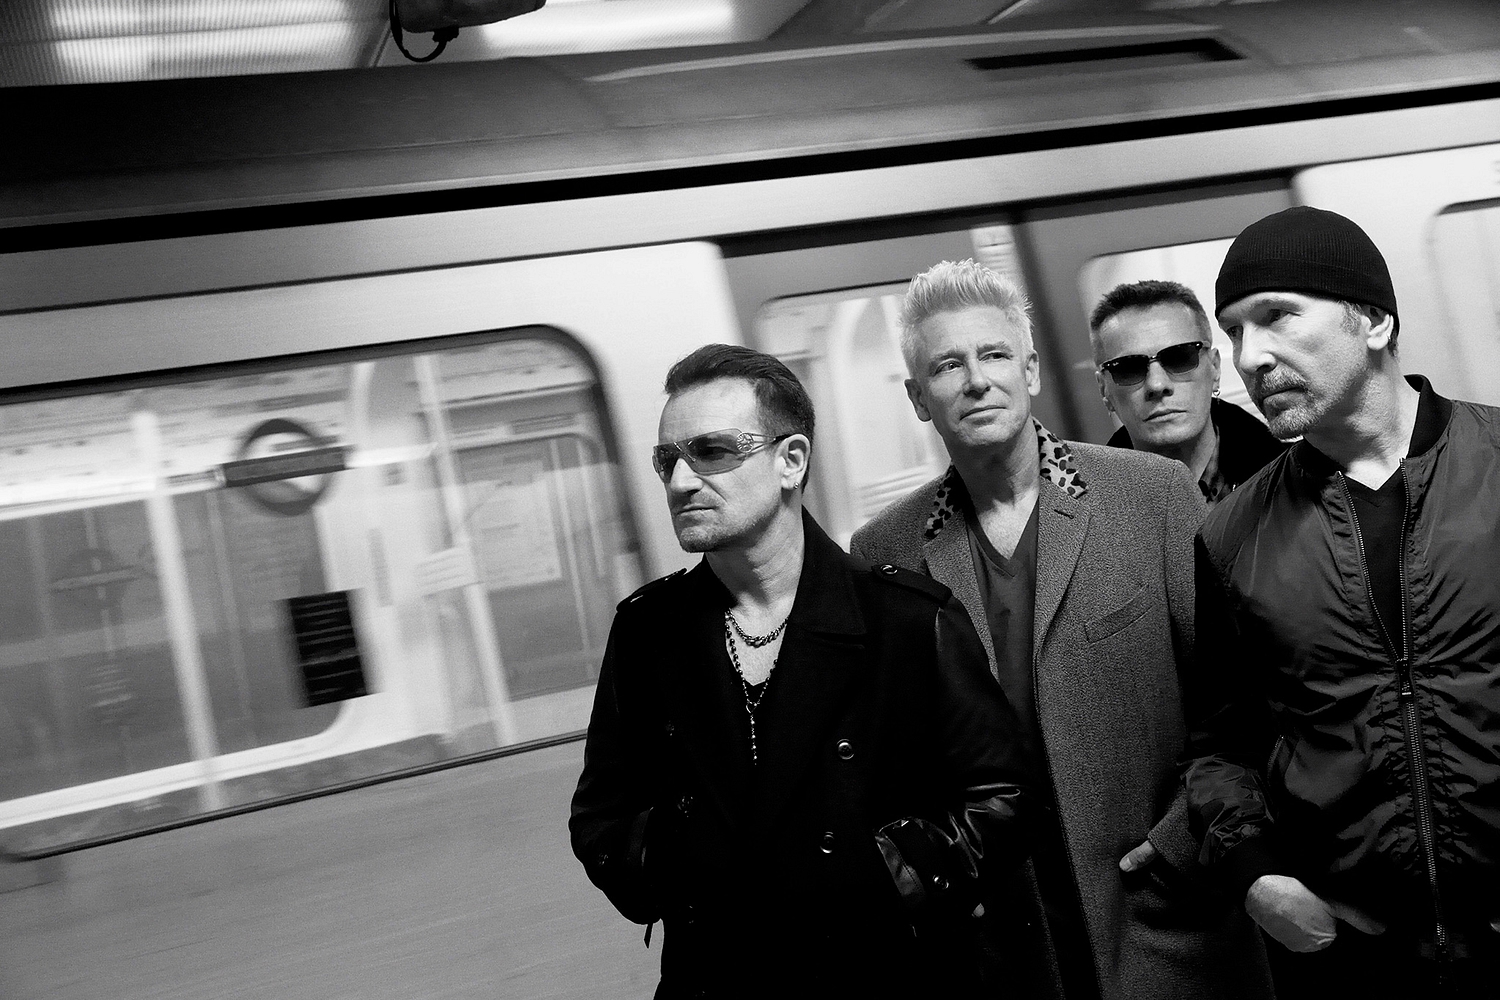 U2 have opened up about their new ‘Songs Of Experience’ album